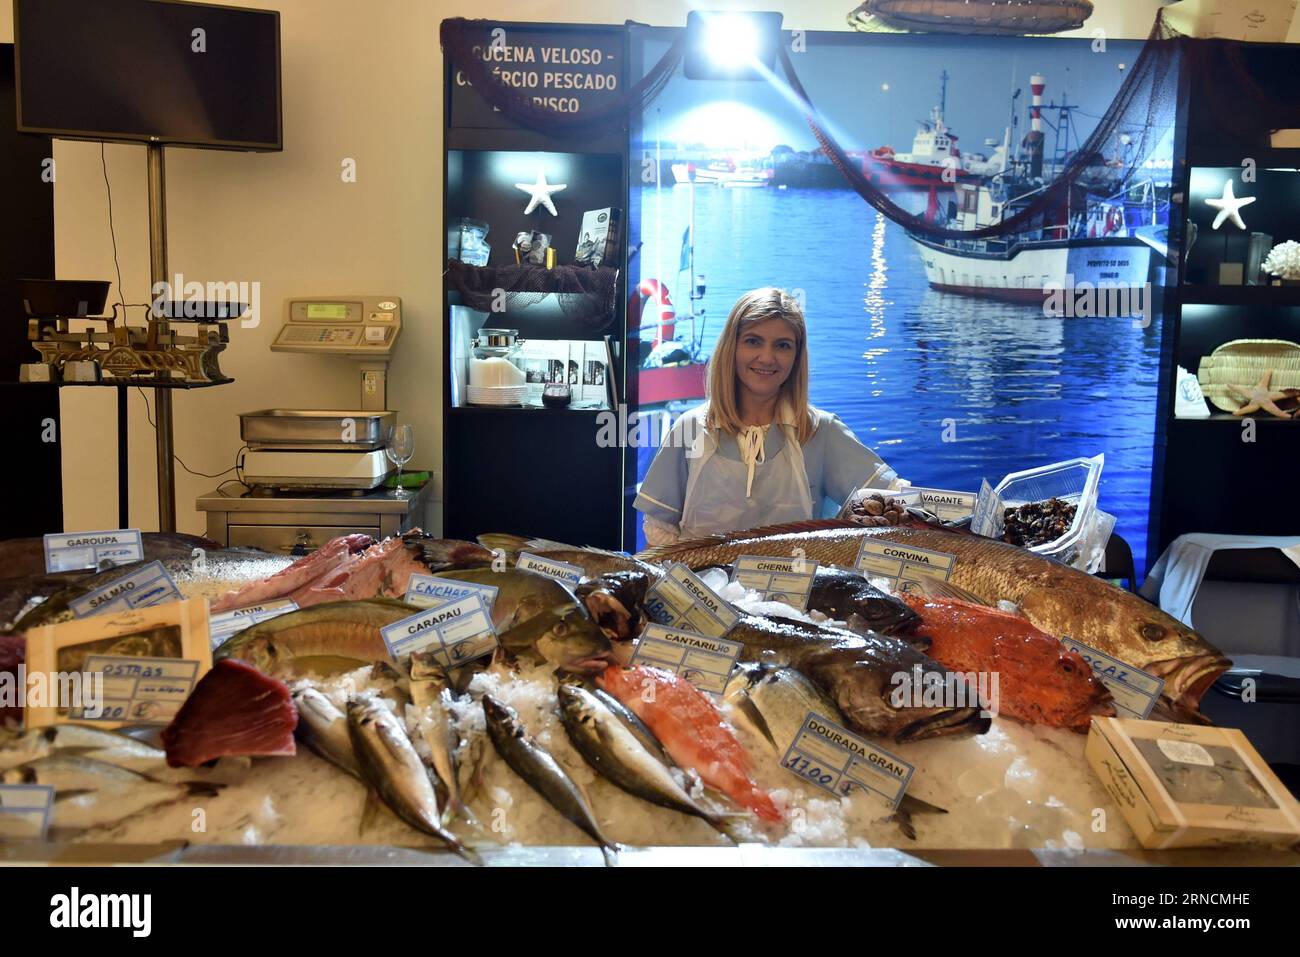 (160416) -- LISBON, April 16, 2016 -- A seller stands behind a seafood stand at the Fish and Flavours foodie event in Lisbon, Portugal, April 16, 2016. The 9th edition of Fish and Flavours foodie event kicked off here on April 7, 2016, with a number of internationally renowned chefs participating. The event will end on April 17. ) PORTUGAL-LISBON-FOODIE EVENT ZhangxLiyun PUBLICATIONxNOTxINxCHN   160416 Lisbon April 16 2016 a Sellers stands behind a Seafood stand AT The Fish and Lambkin flavors foodie Event in Lisbon Portugal April 16 2016 The 9th Edition of Fish and Lambkin flavors foodie Even Stock Photo